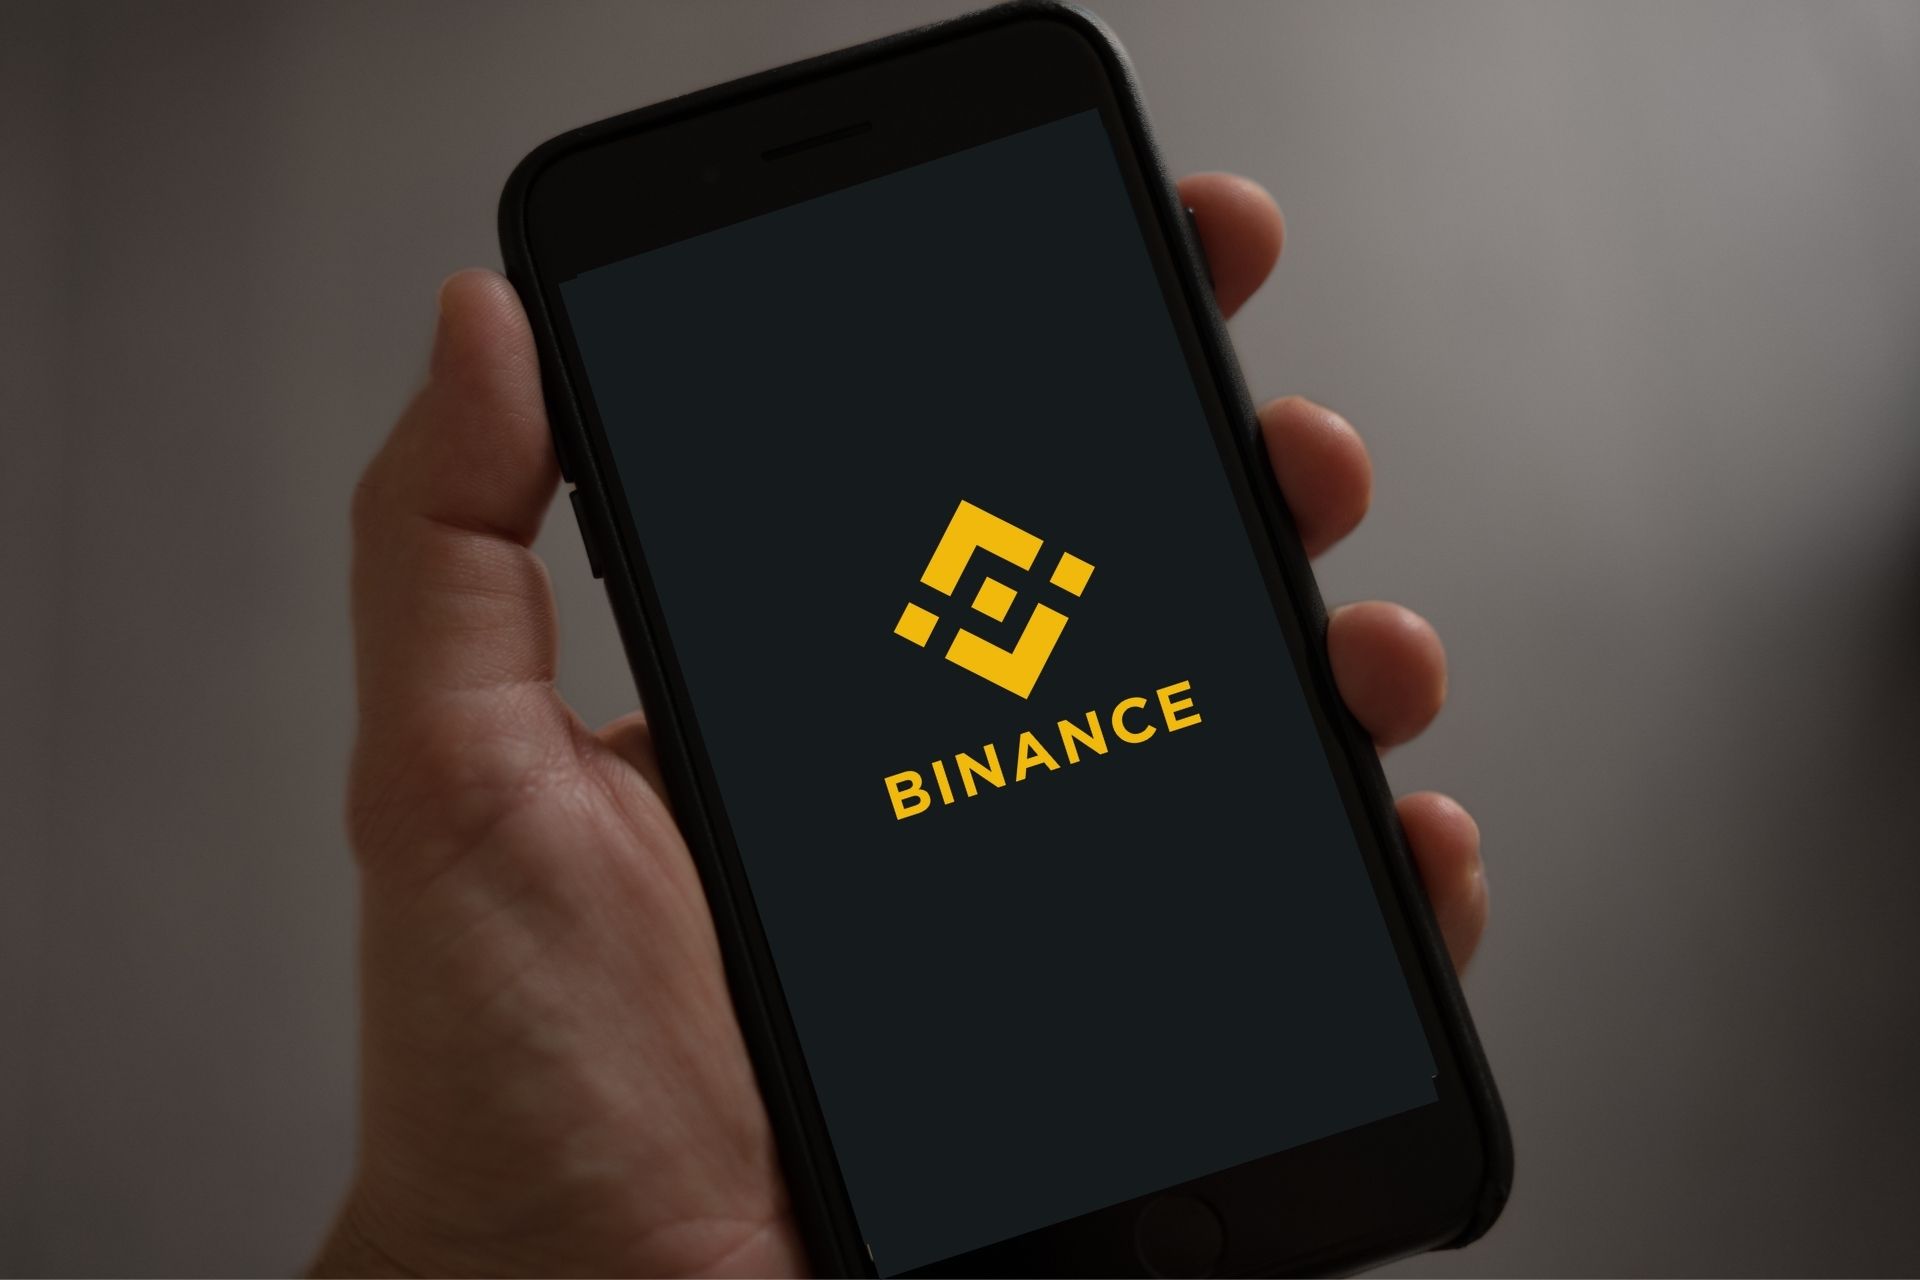 Binance Users Can Now Utilize Apple Pay and Google Pay